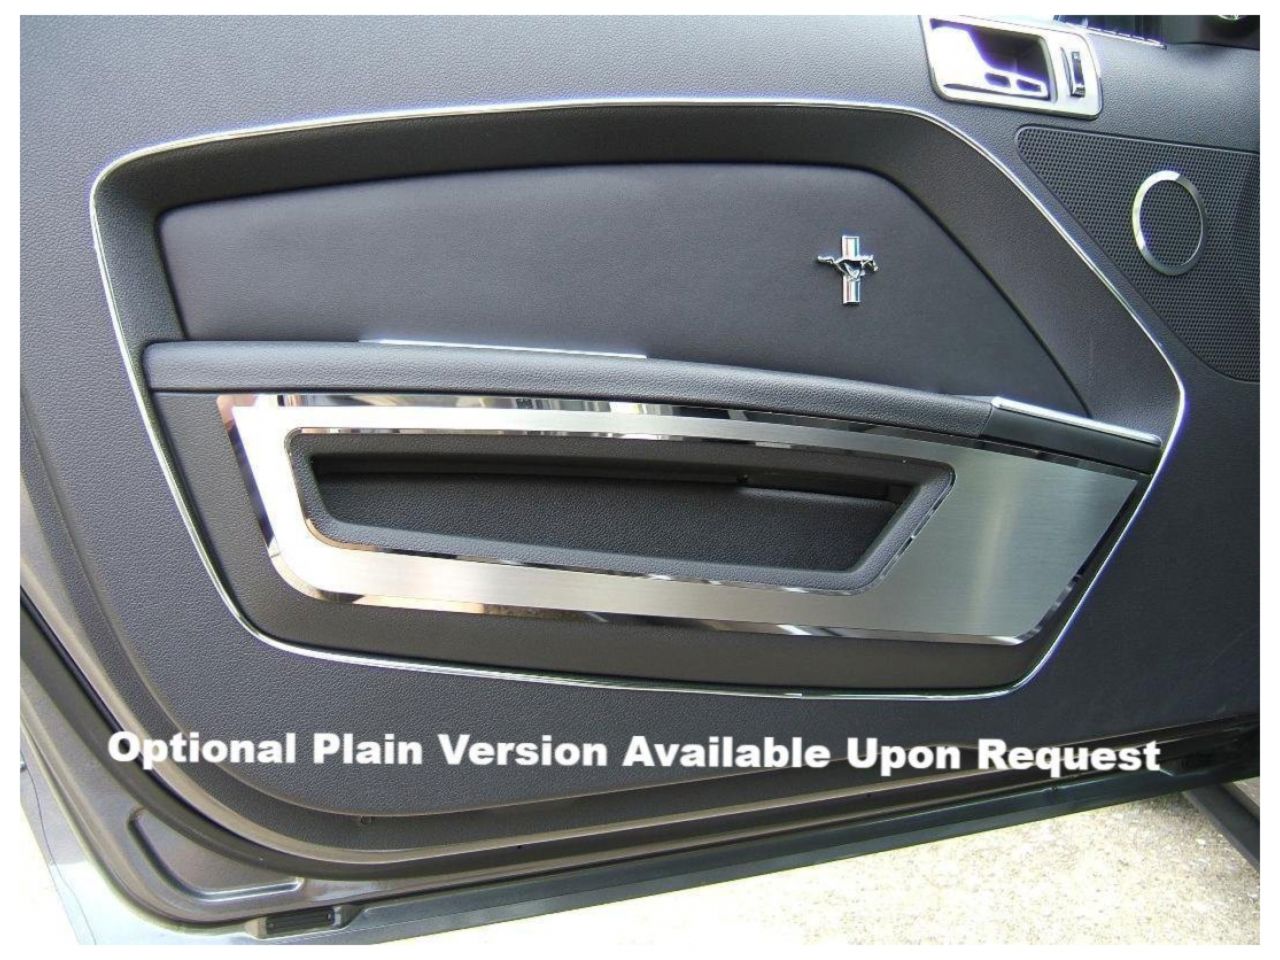 American Car Craft (ACC) 2010-2014 Mustang - Brushed Door Guards with Polished "5.0" Lettering